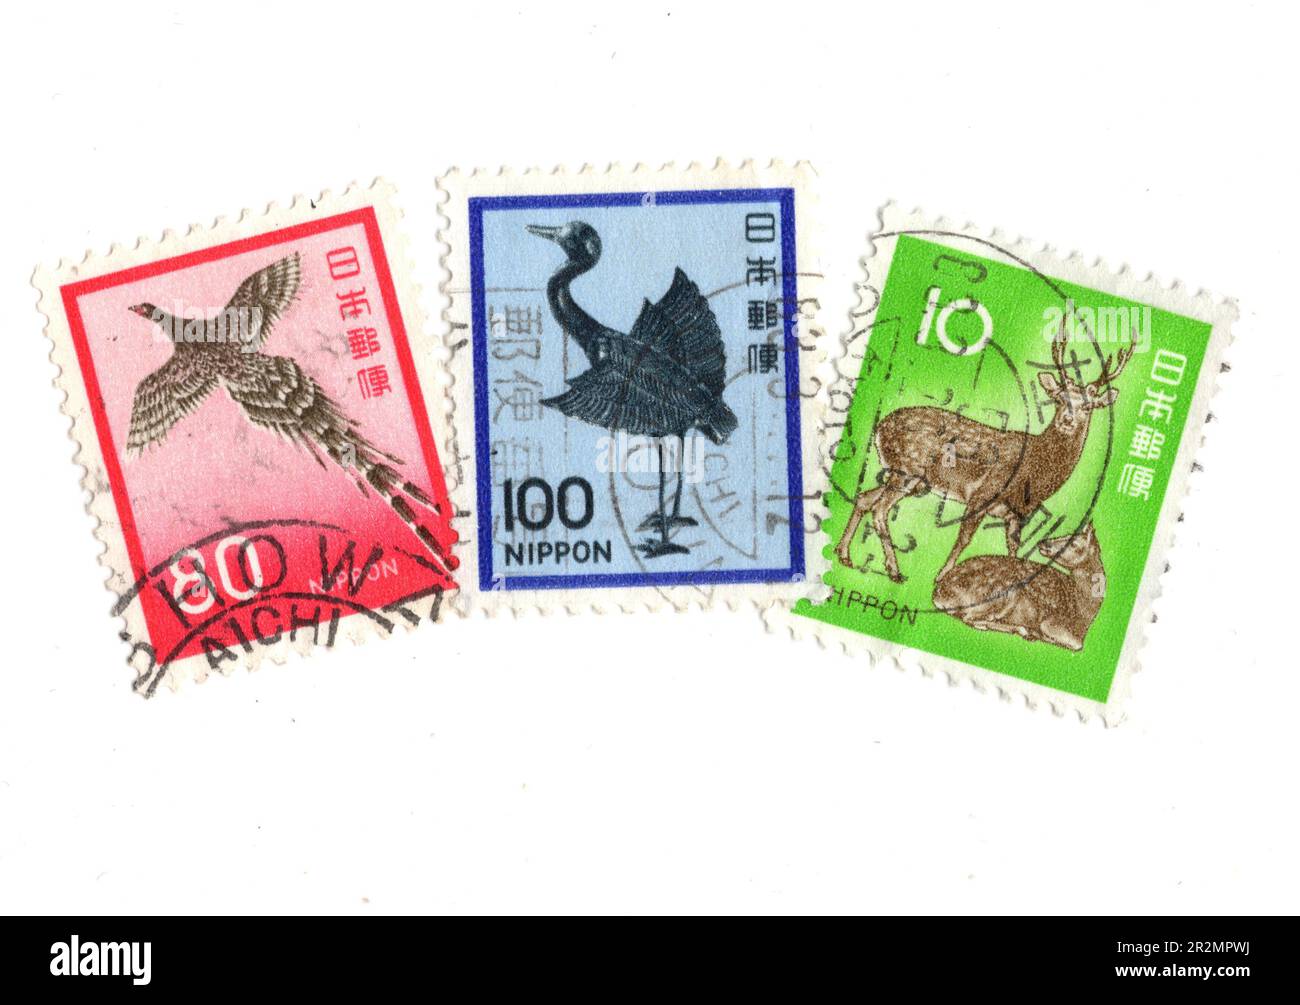 How to buy postage stamps at Konbini in Japan